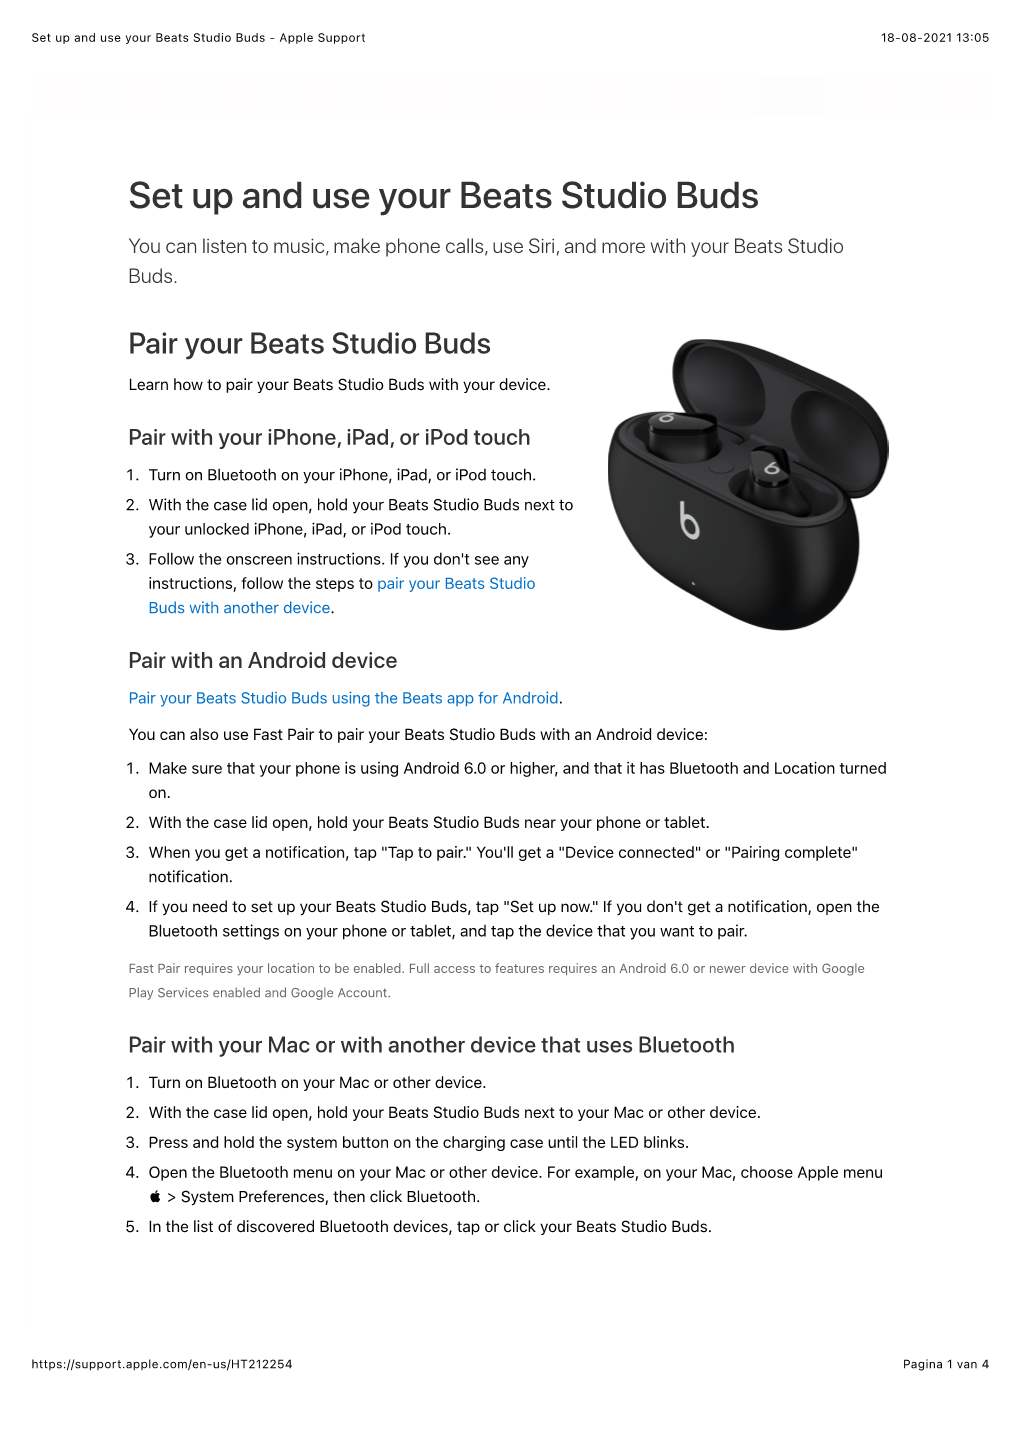 Set up and Use Your Beats Studio Buds - Apple Support 18-08-2021 13:05